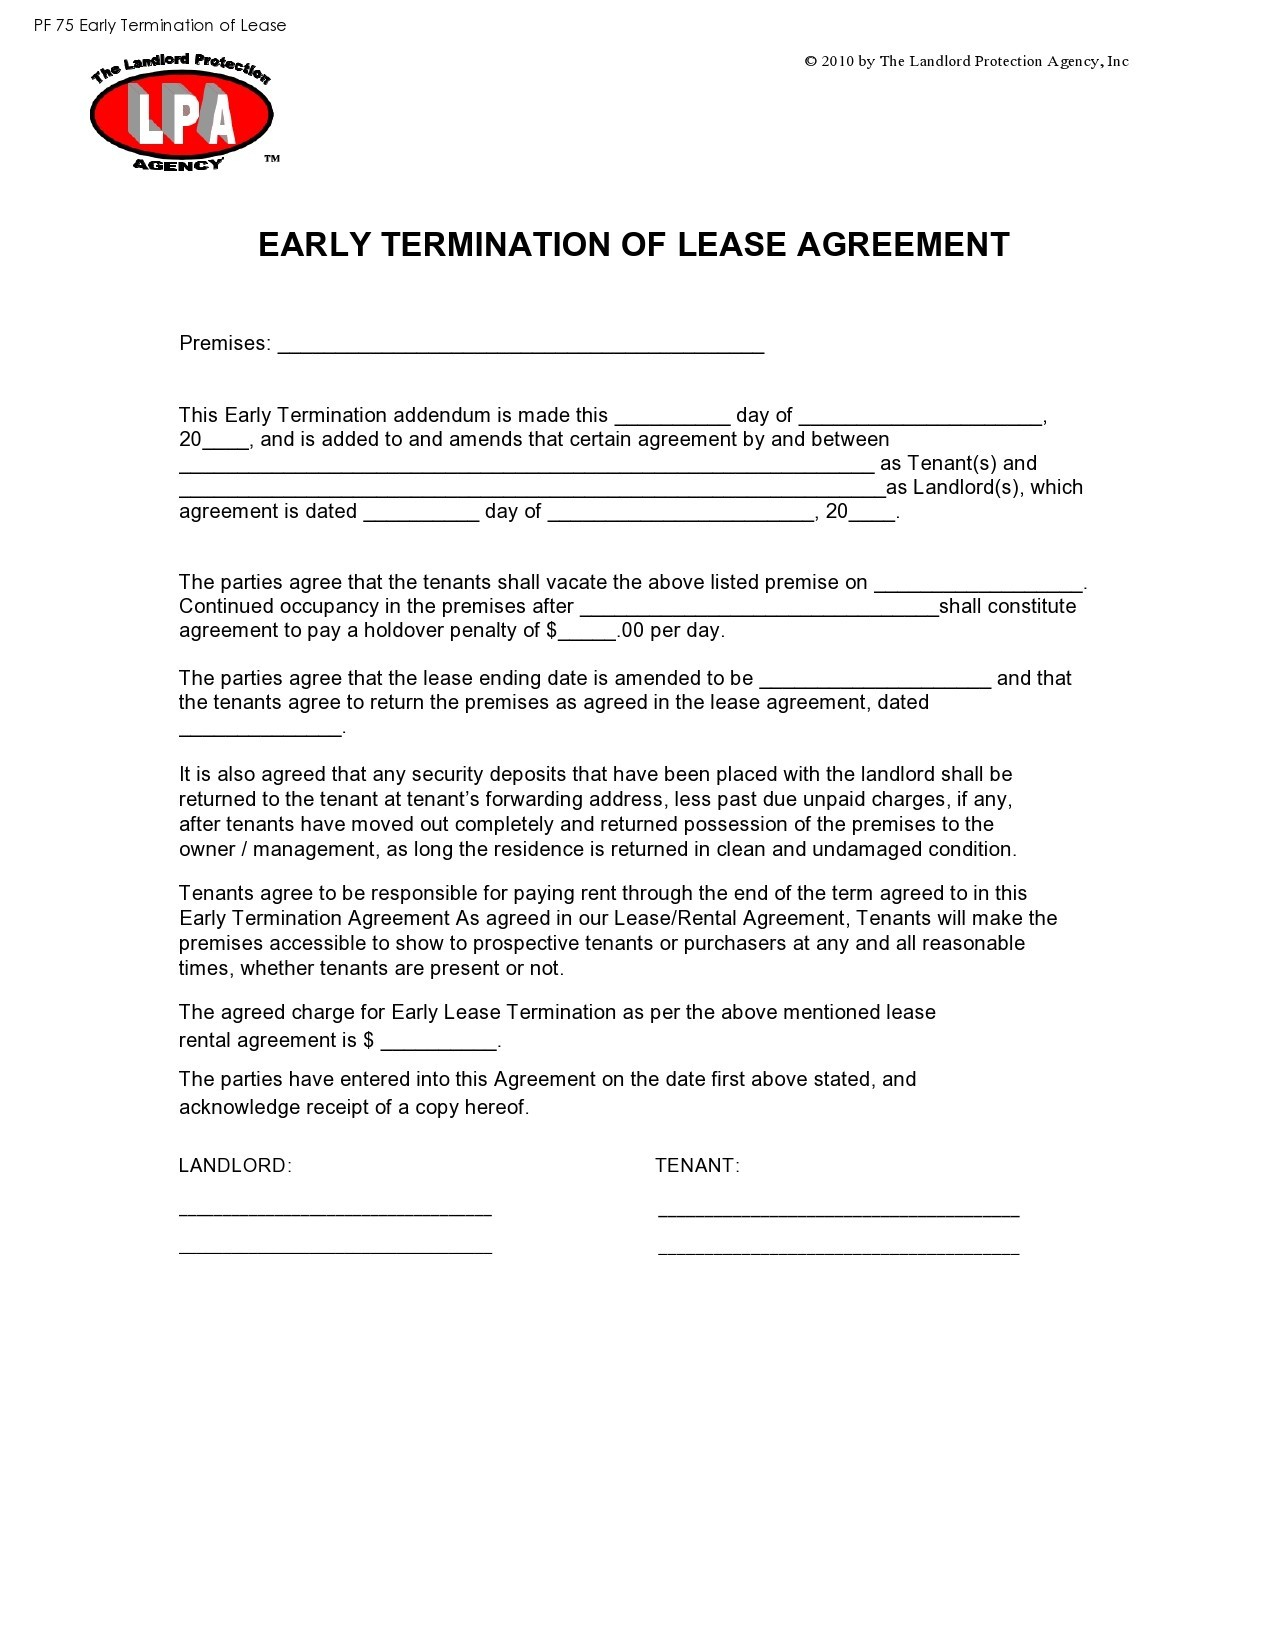 47 Early Lease Termination Letters Agreements TemplateLab